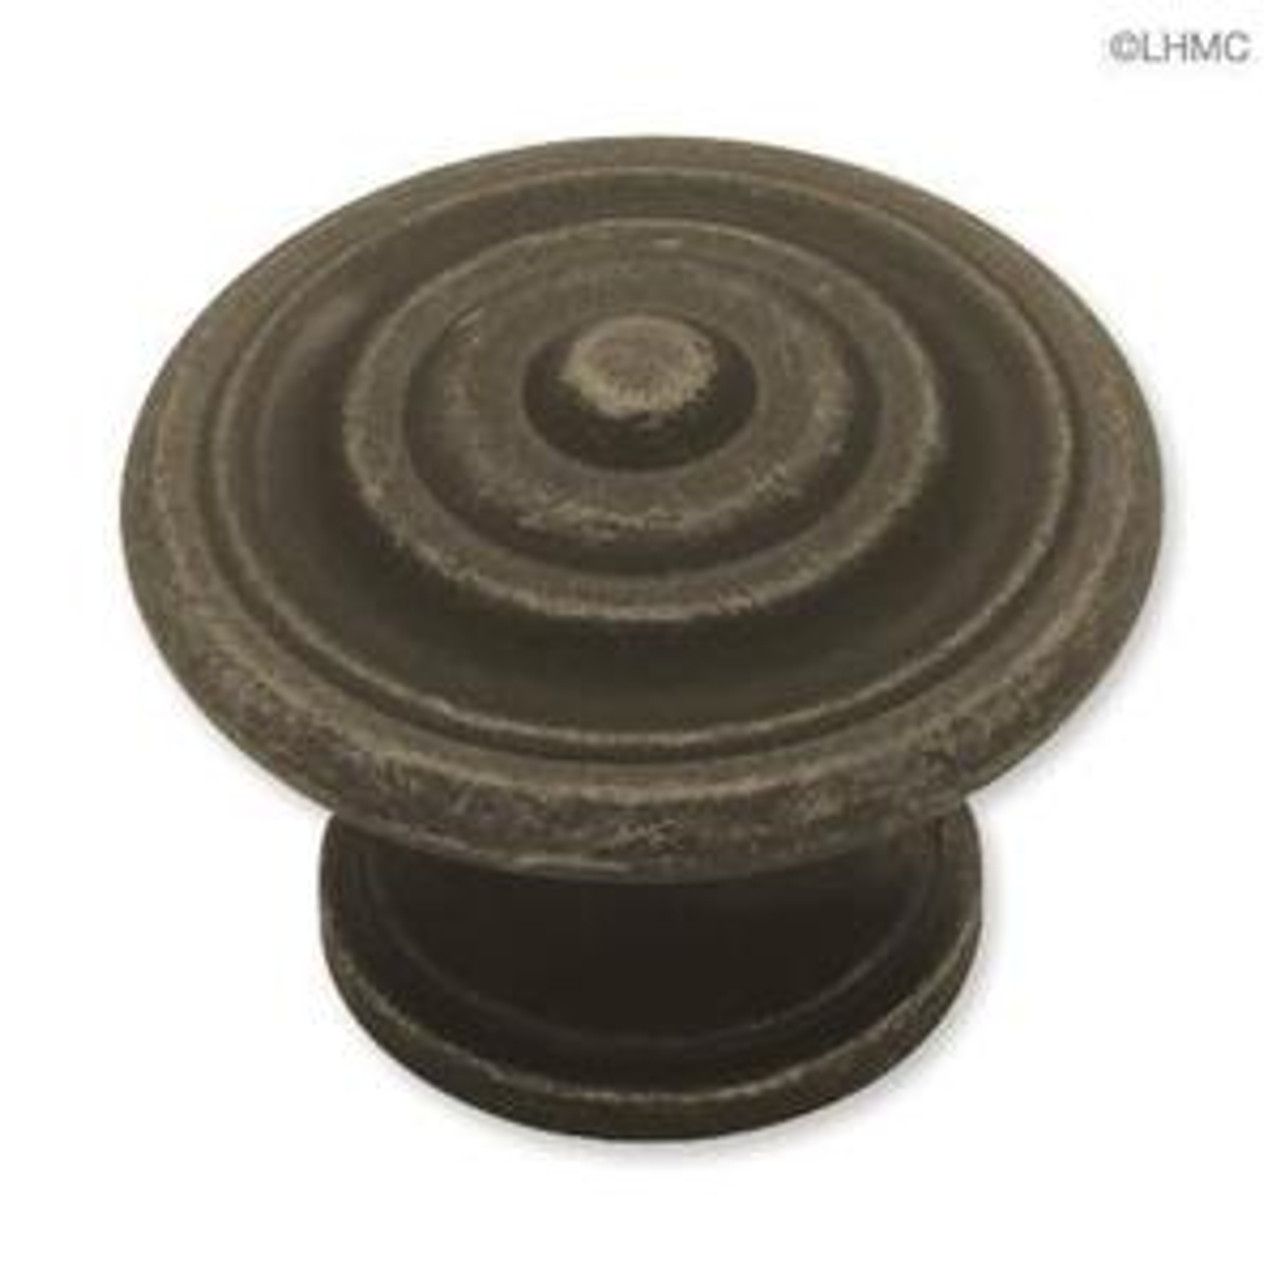 PN0407-OB Oil Rubbed Bronze 1 3/8" Concentric Cabinet Drawer Pull Knob